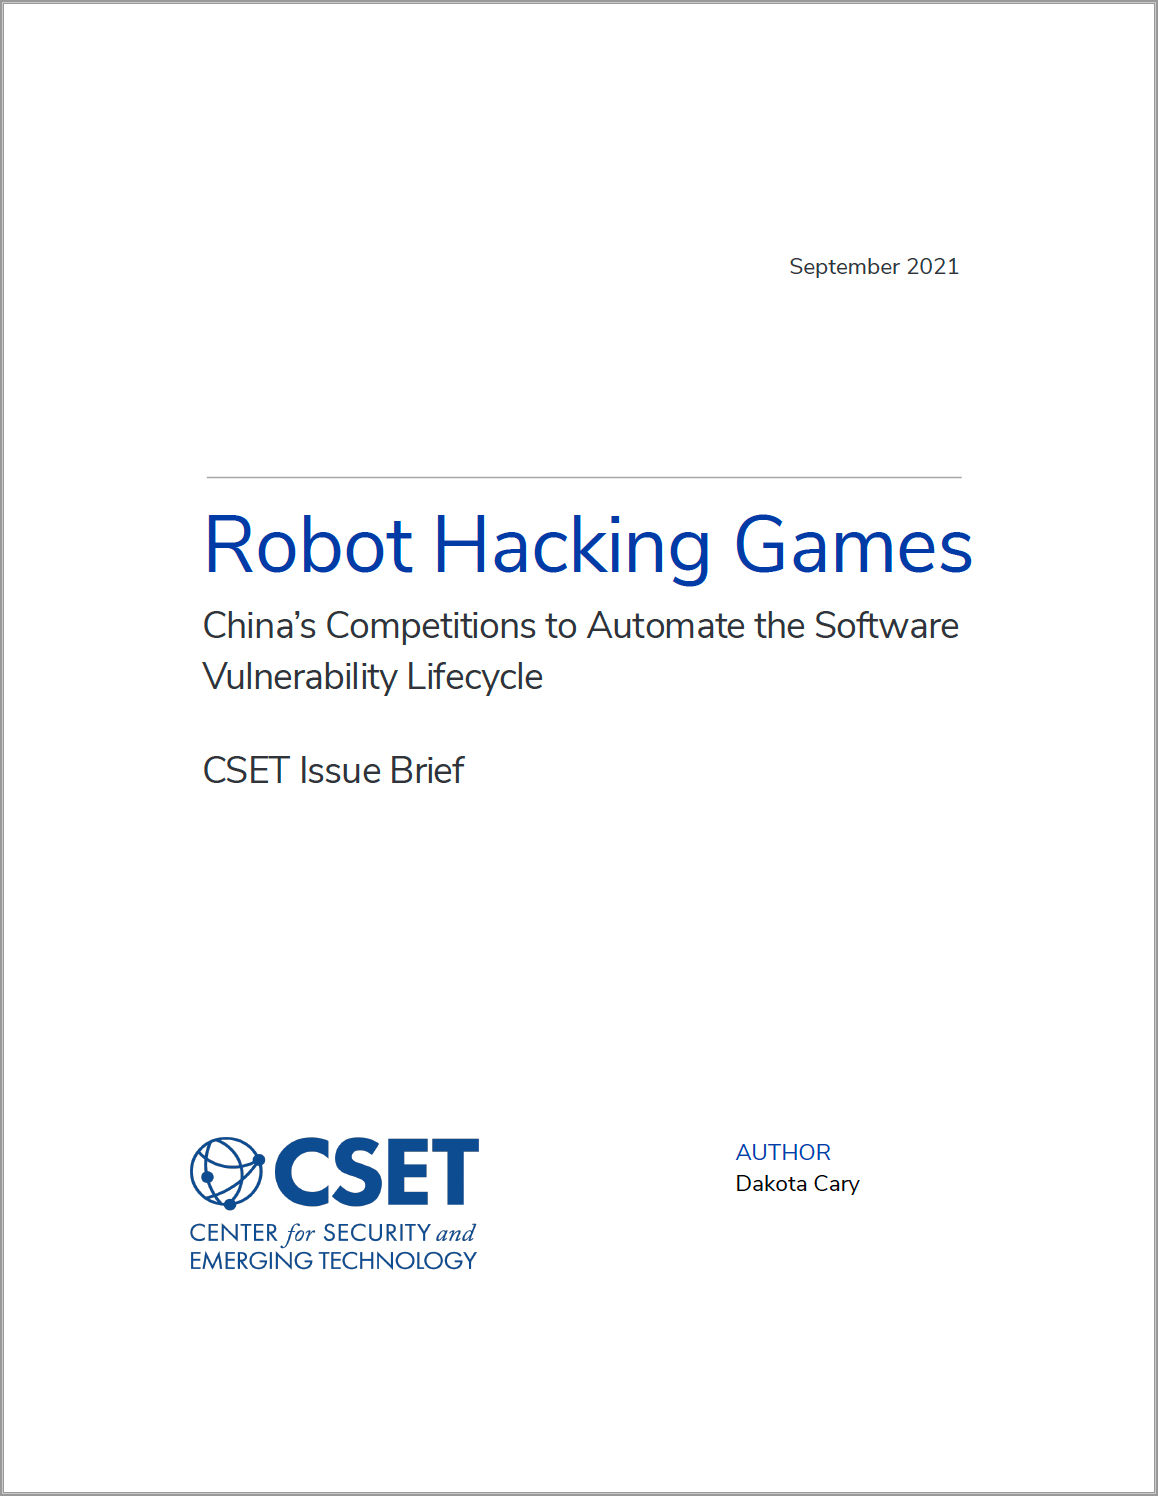 Robot Hacking Games - Center for Security and Emerging Technology